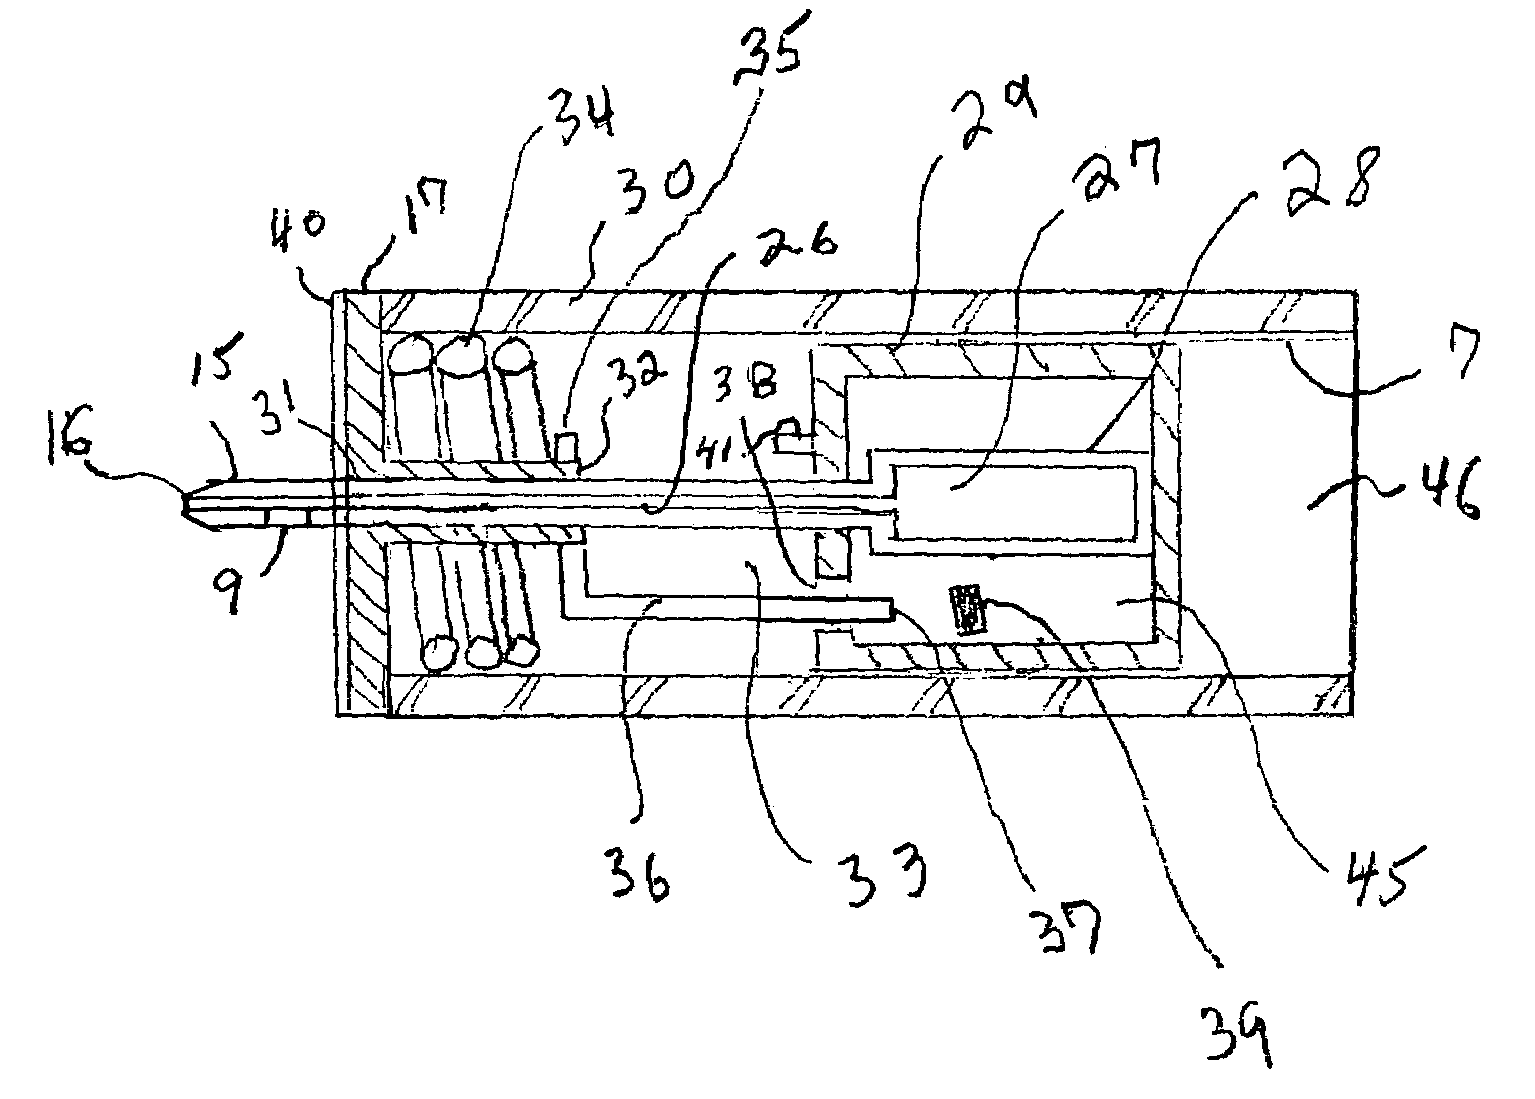 Projectile blood collection device